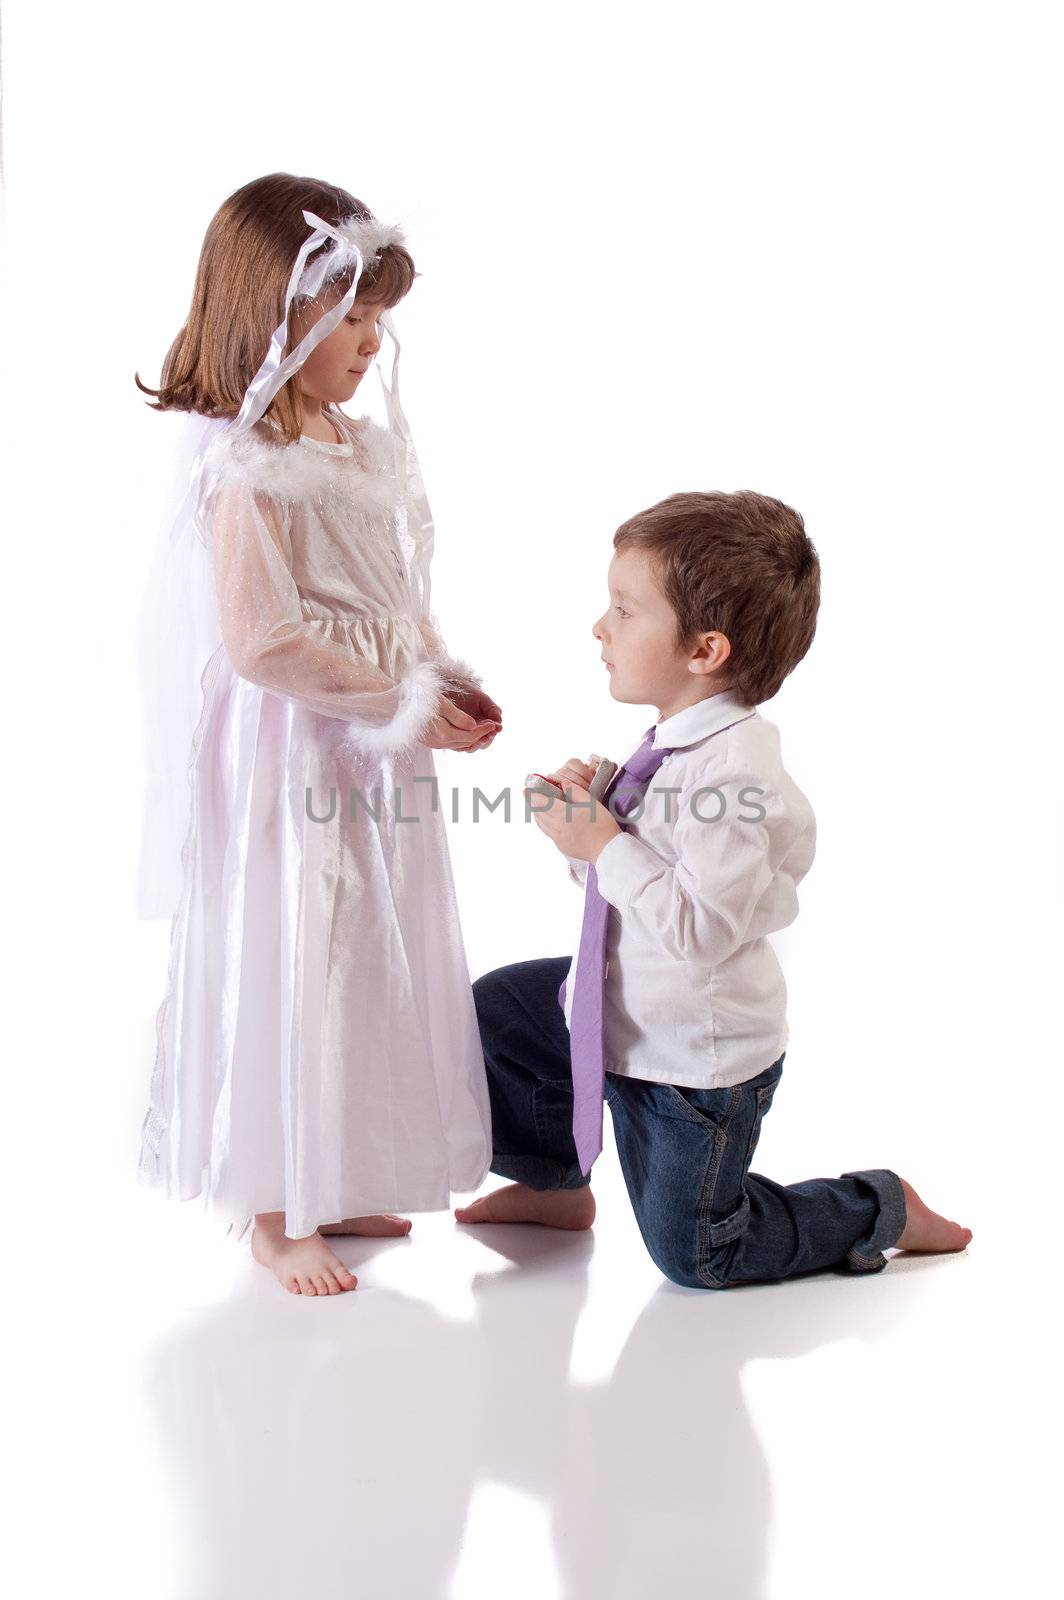 Cute little boy giving an engagement ring to a girl